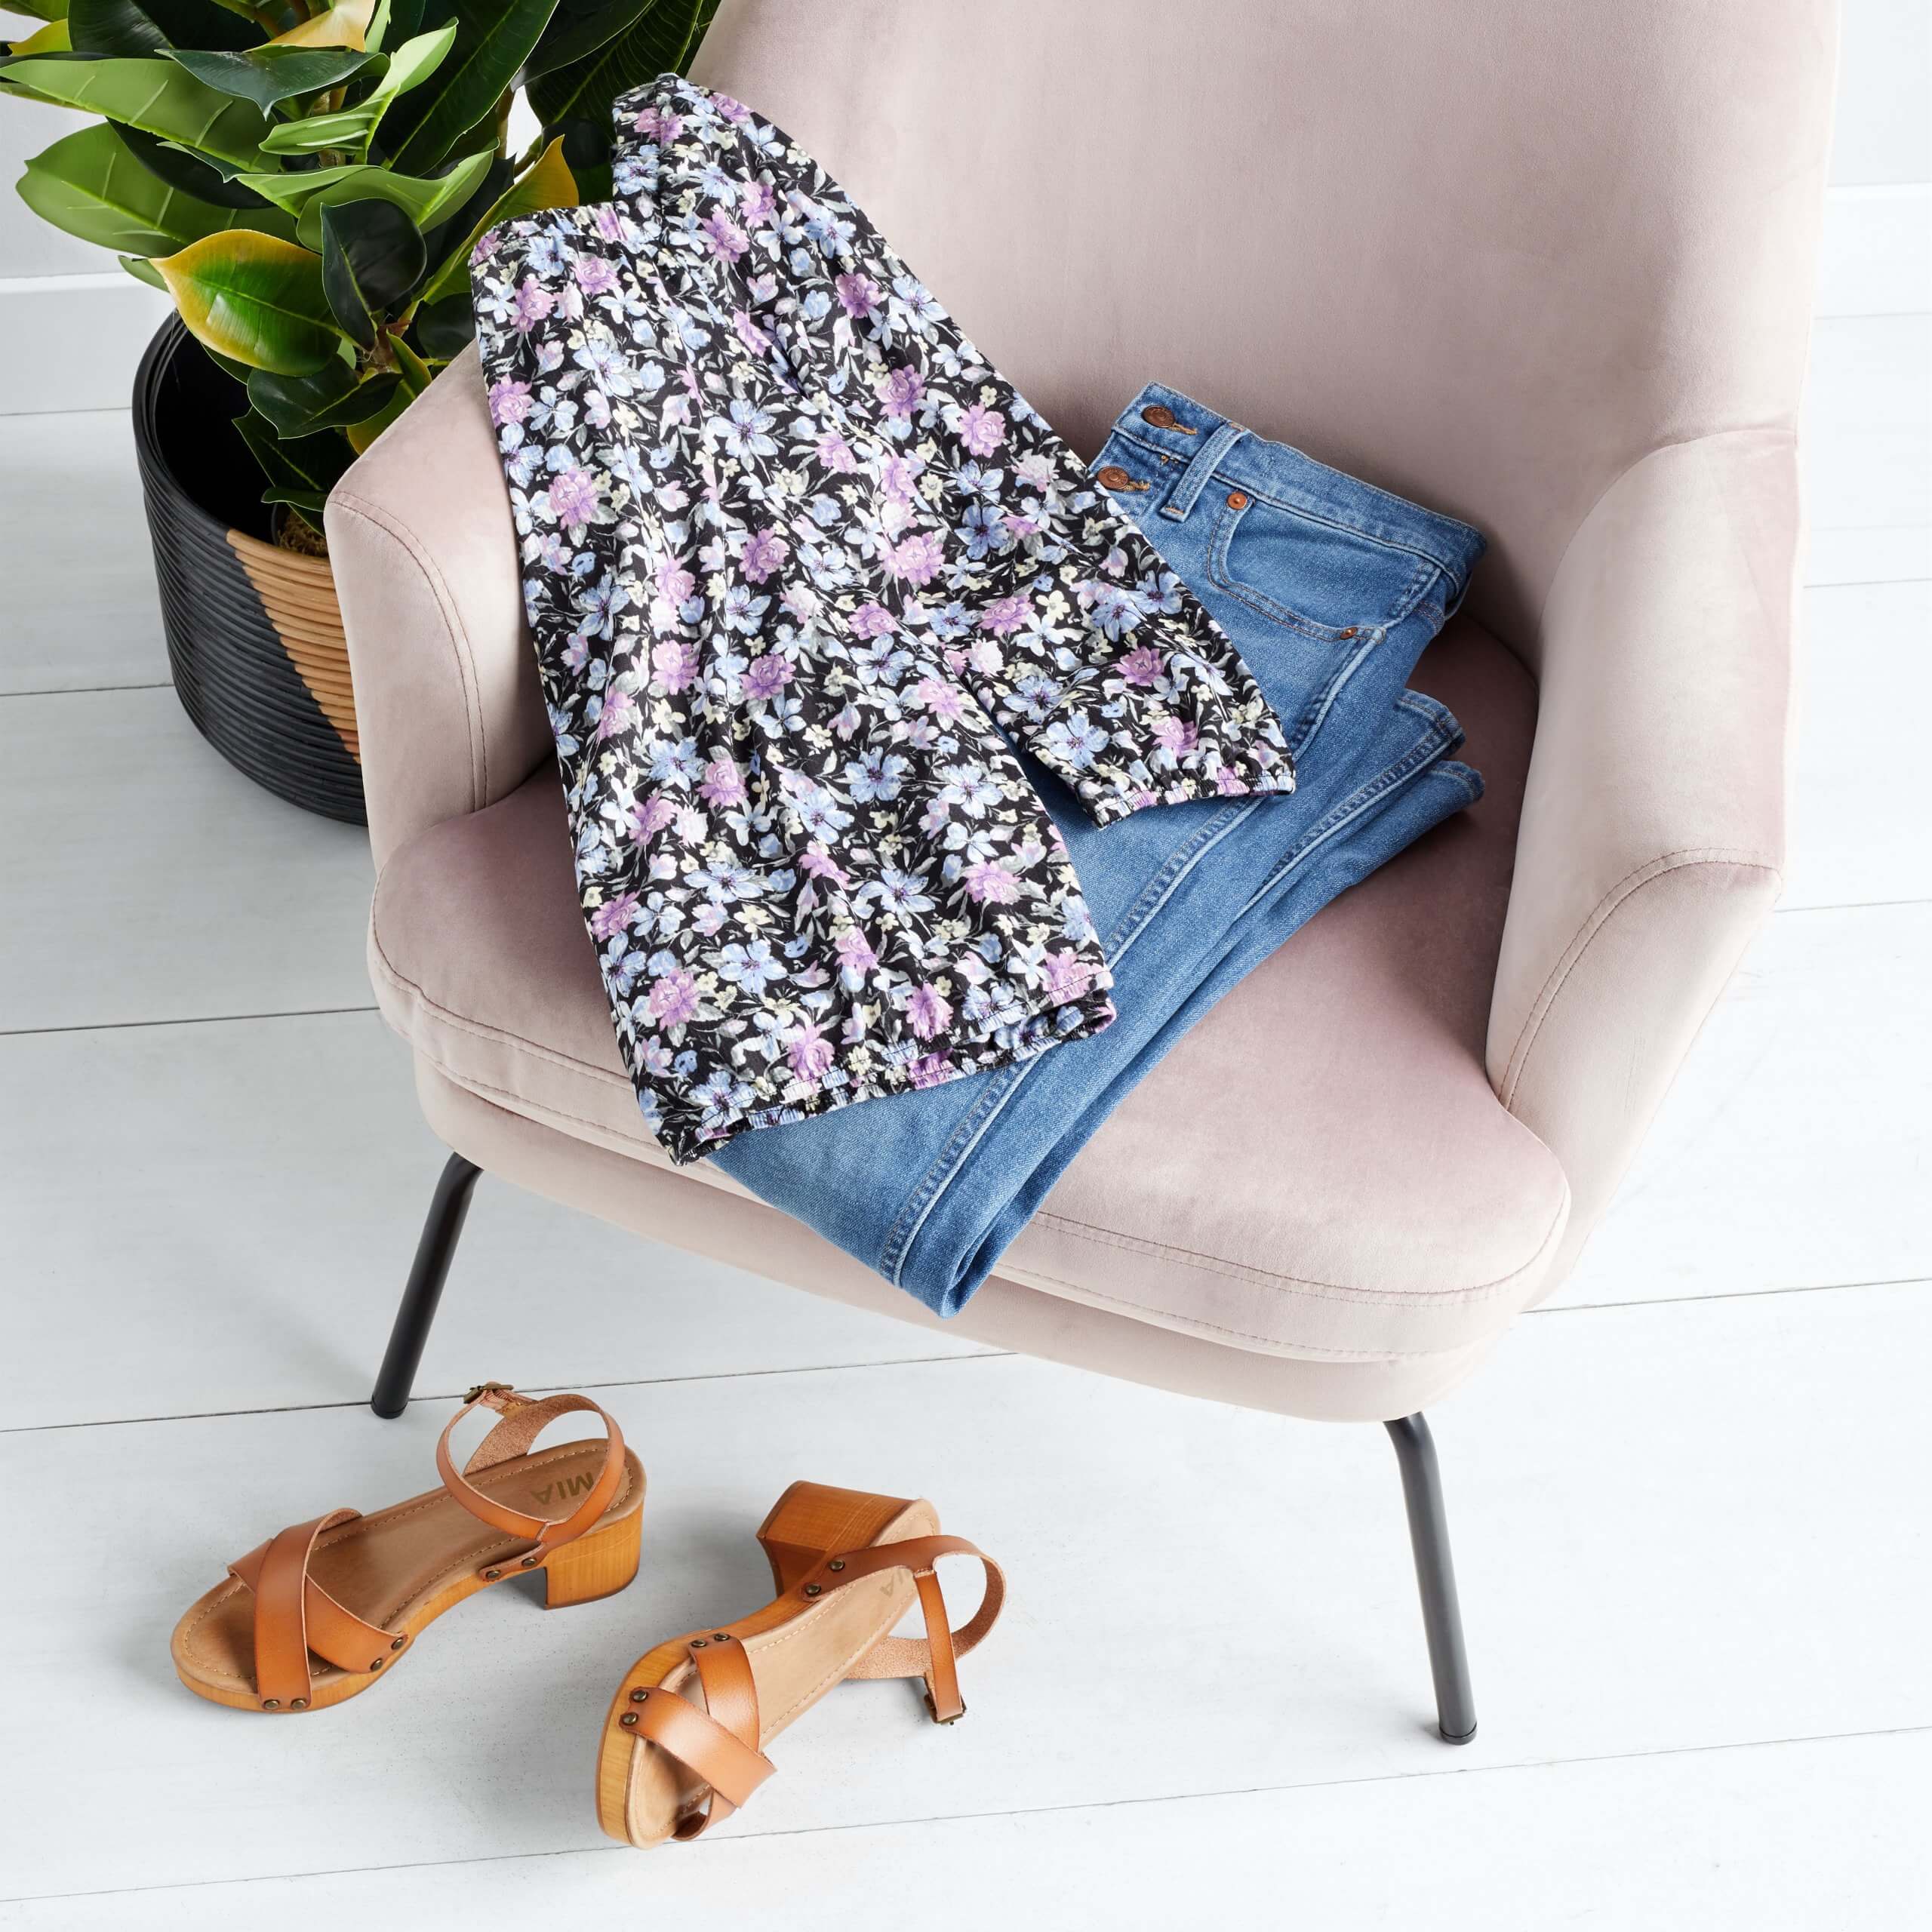 Stitch Fix women’s blue jeans and floral blouse on a pink chair next to potted plant and leather heel sandals on floor.